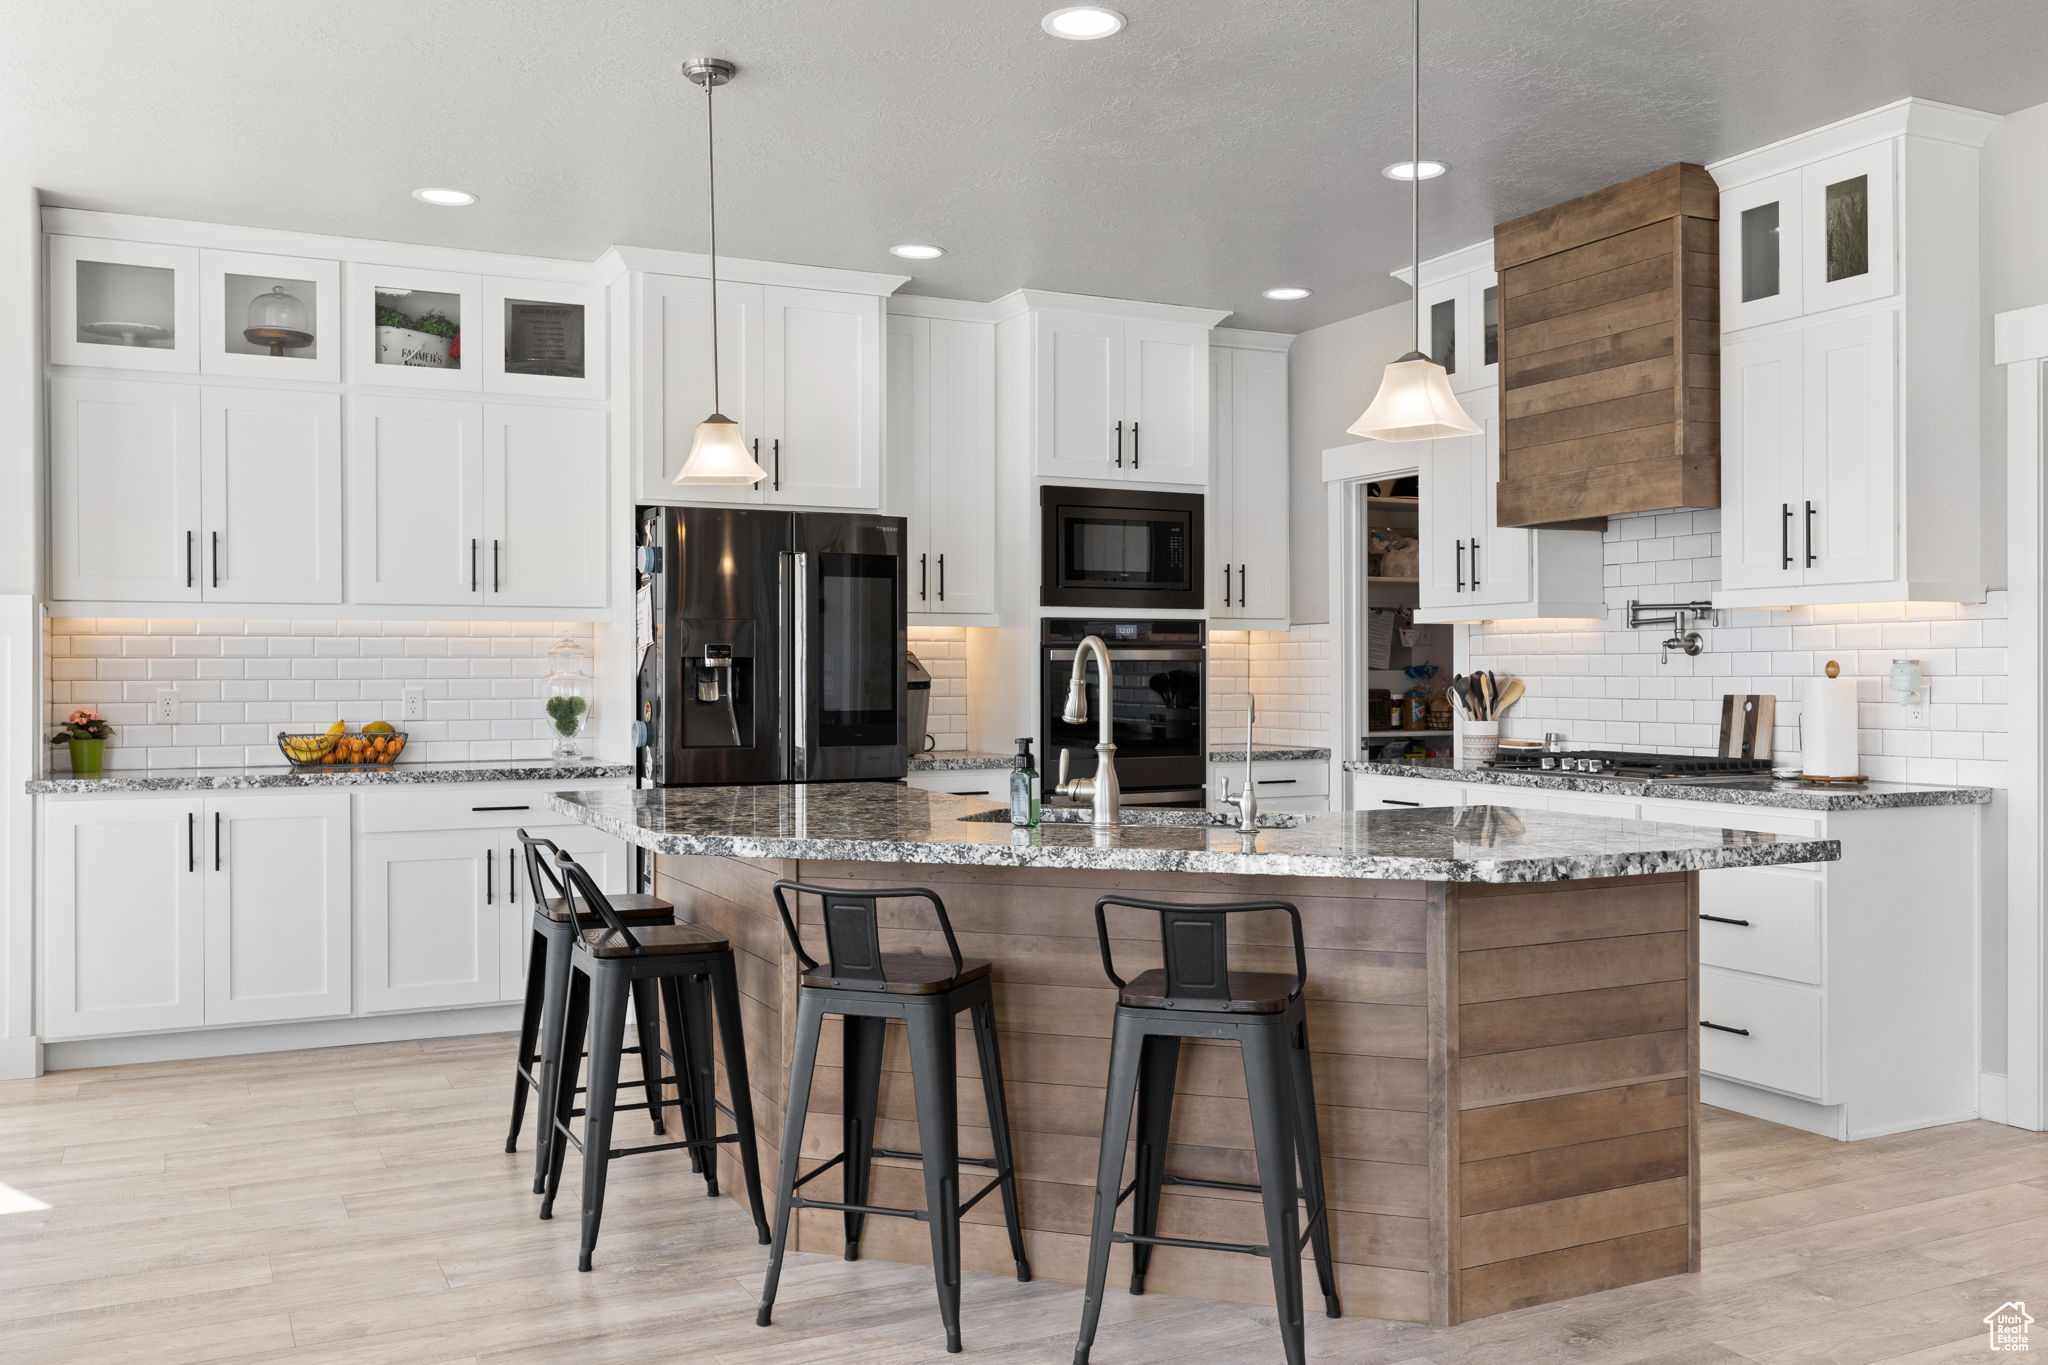 Kitchen featuring decorative light fixtures, black appliances, and an island with sink